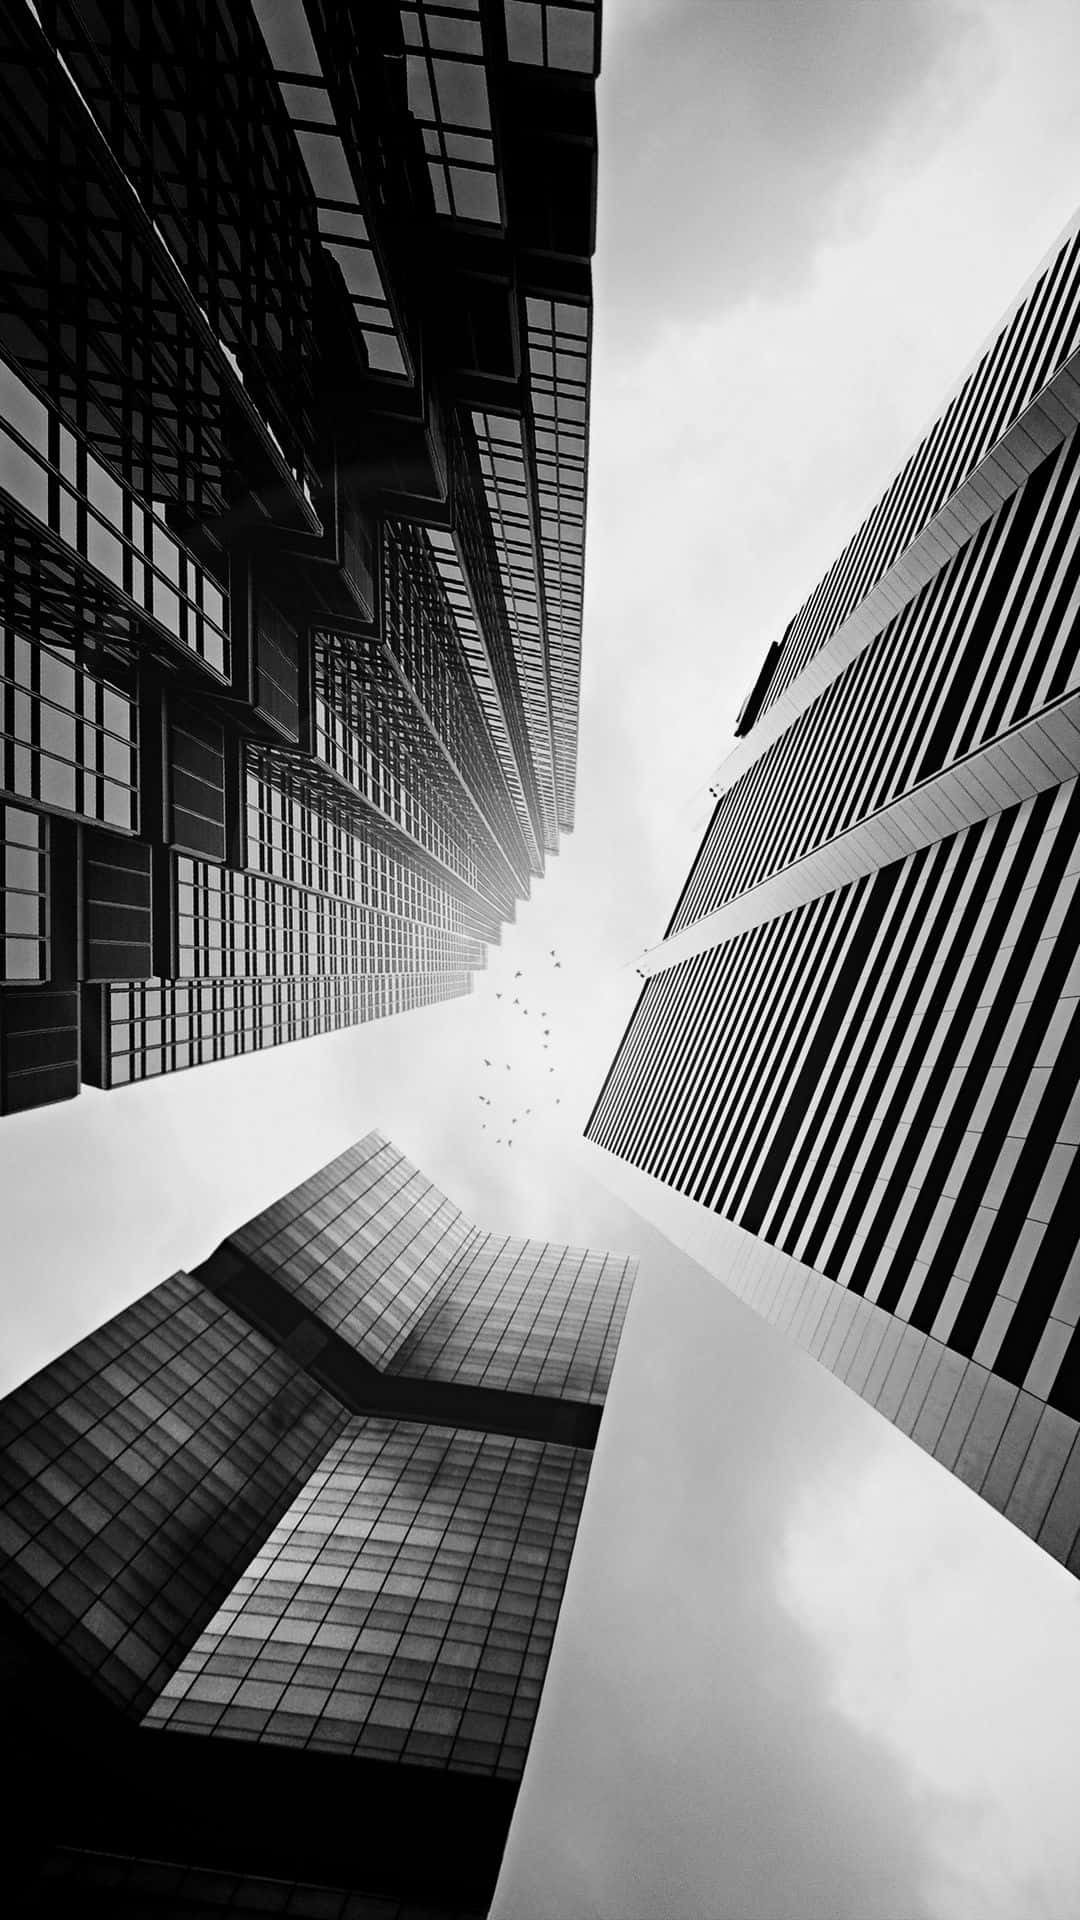 Captivating Black and White Architecture Wallpaper